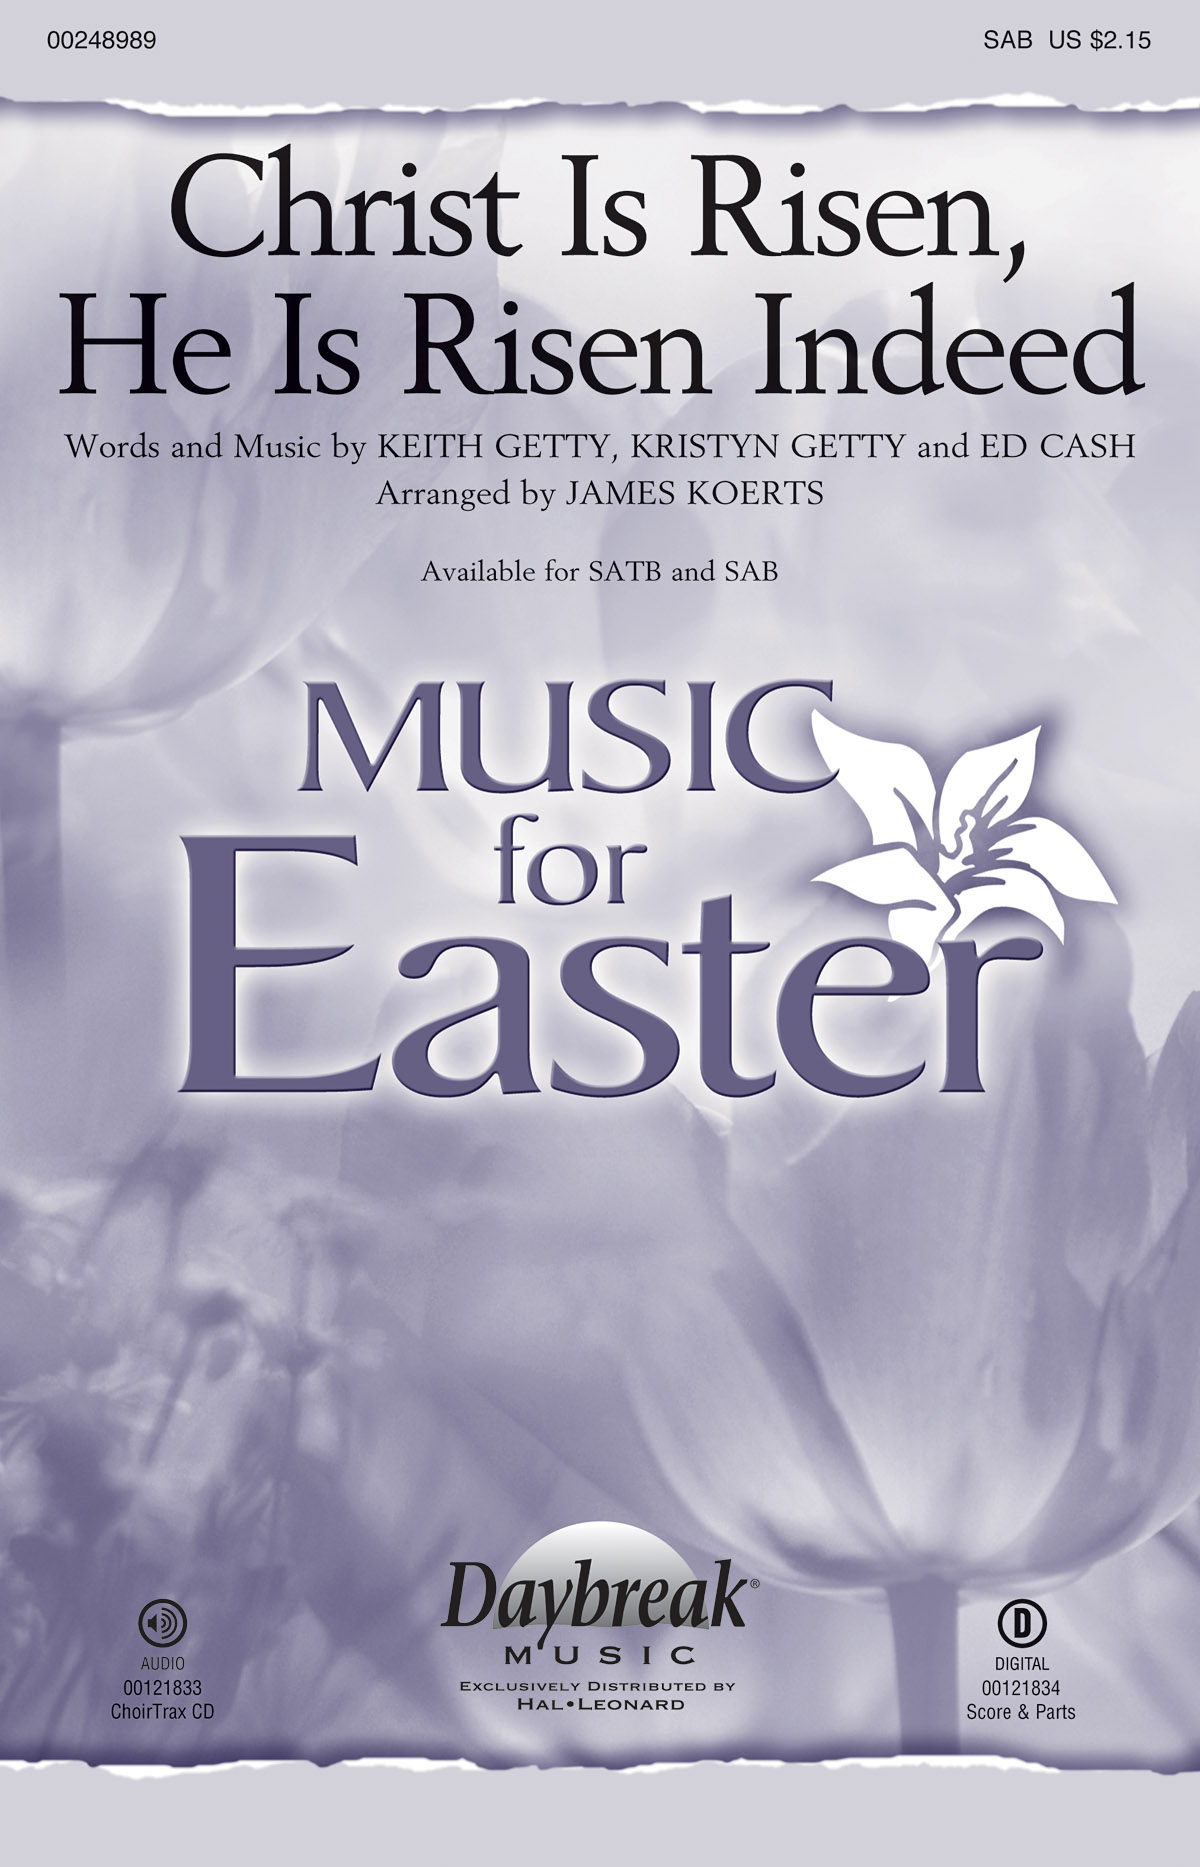 Keith Getty Kristyn Getty Ed Cash: Christ Is Risen  He Is Risen Indeed: Mixed